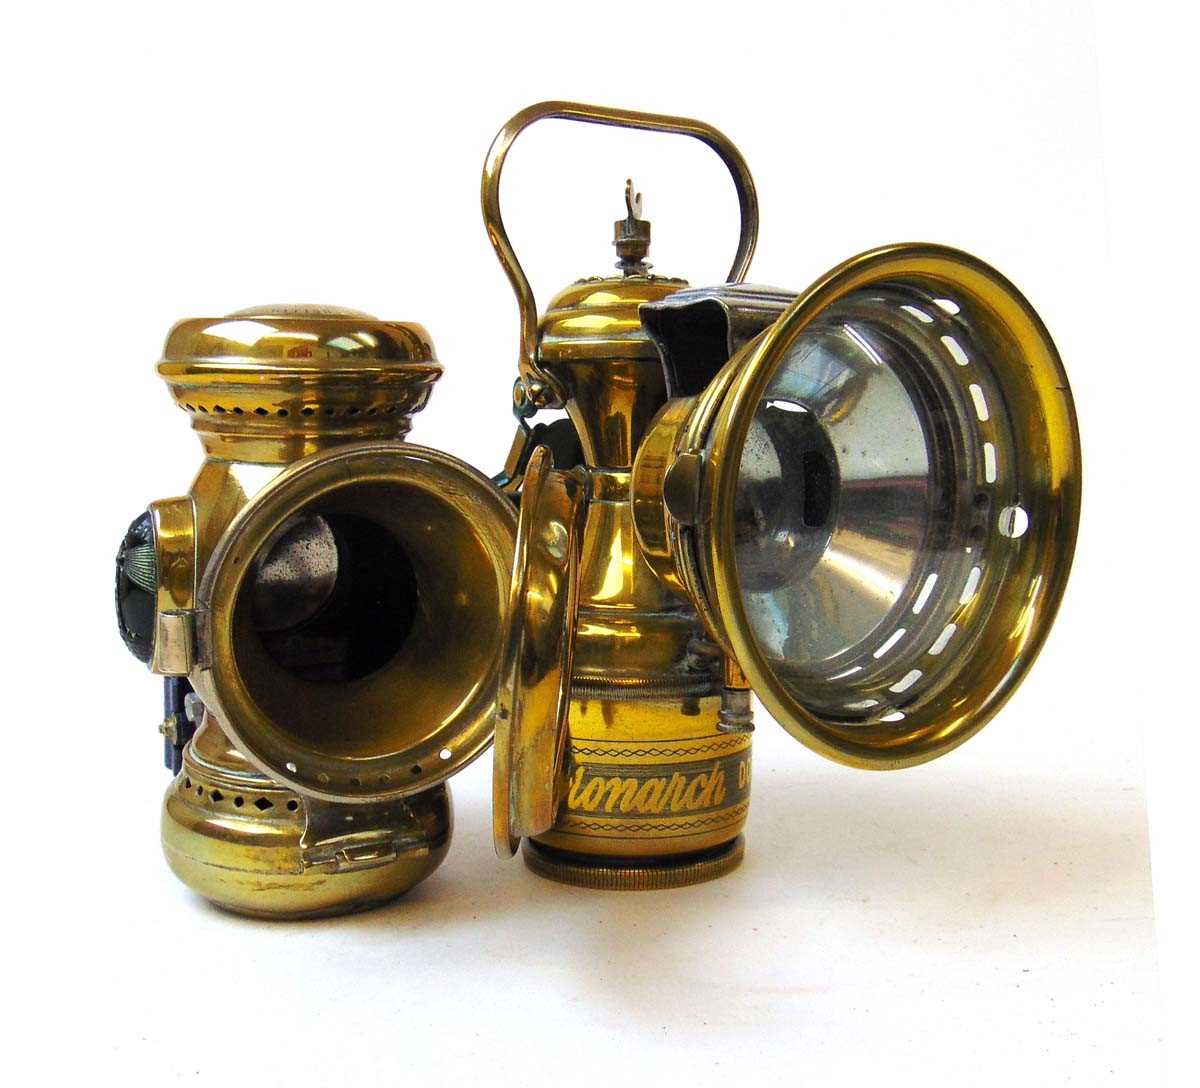 A Miller & Co Ltd 'Excelite' and 'Monarch' carbide bicycle lights, the Excelite with red and green - Image 2 of 3